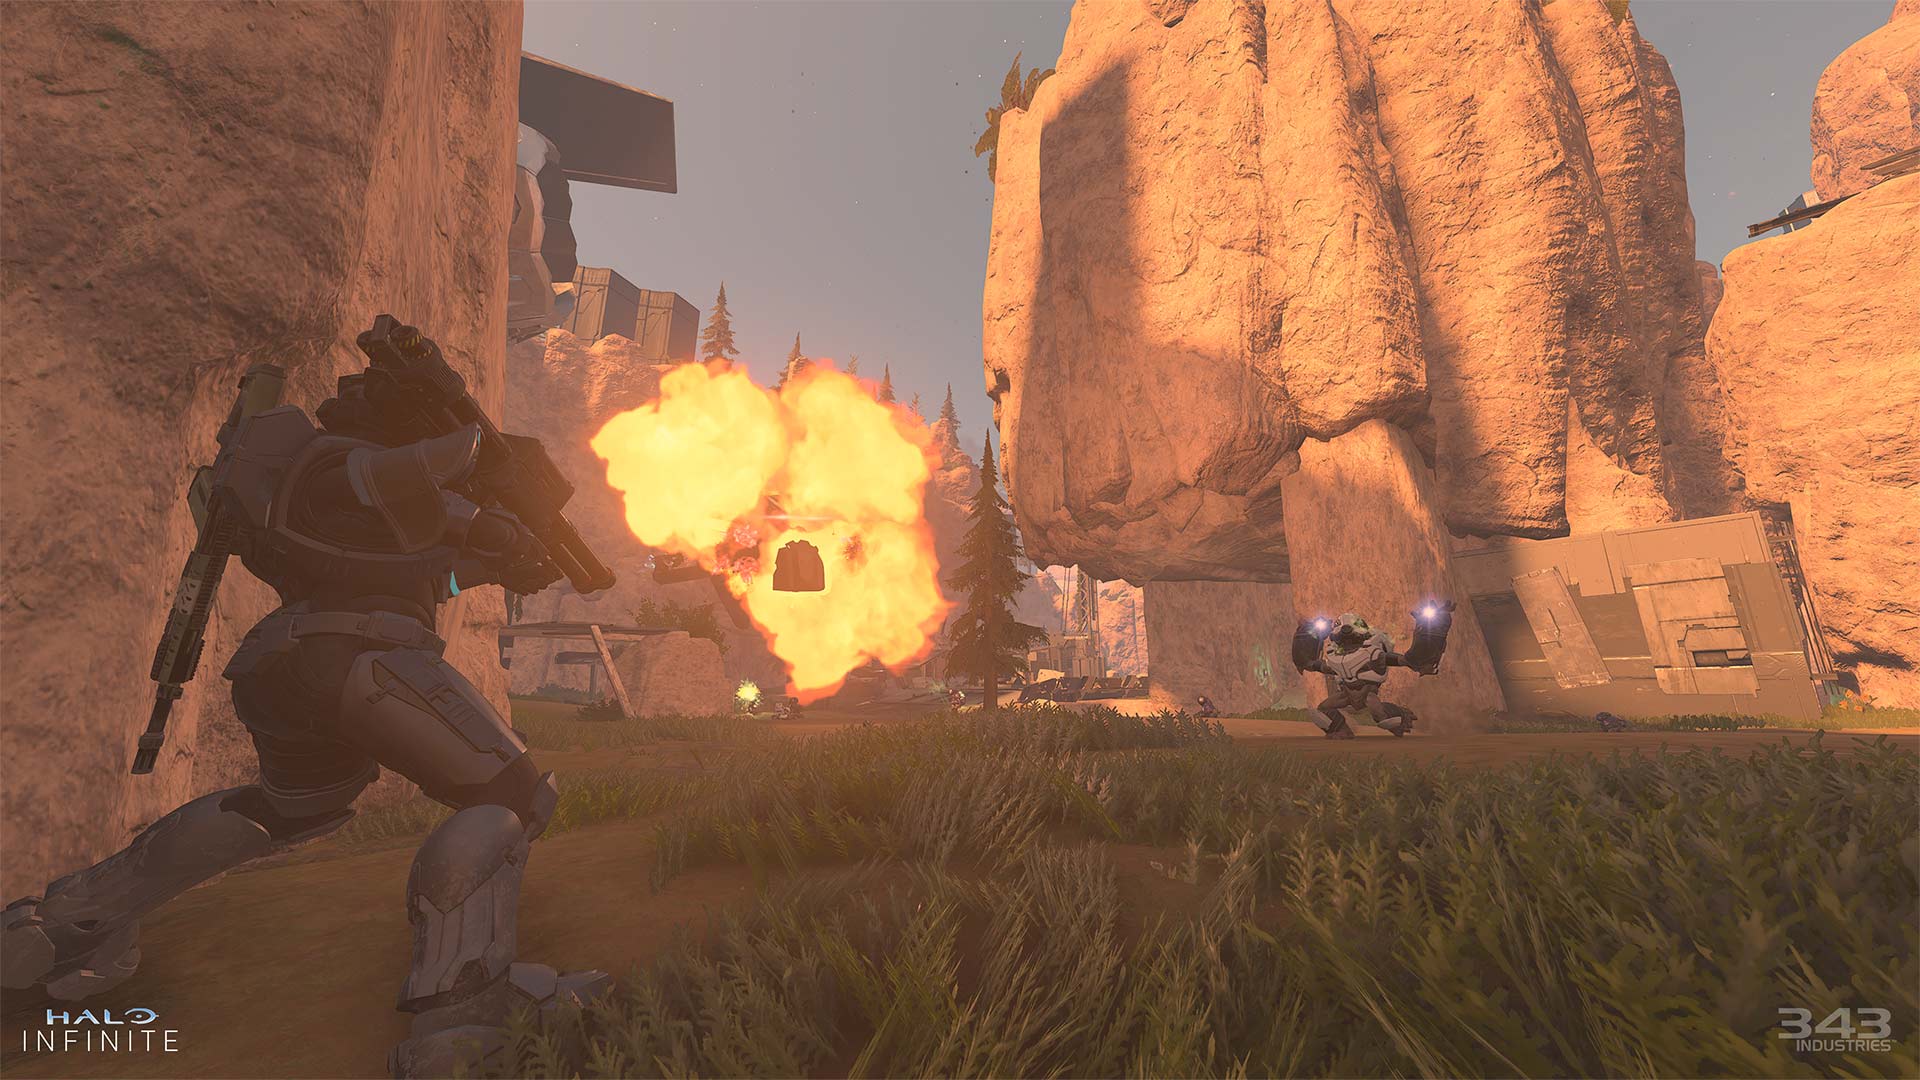 A Grunt holding plasma grenades facing off against a Spartan holding a Rocket Launcher